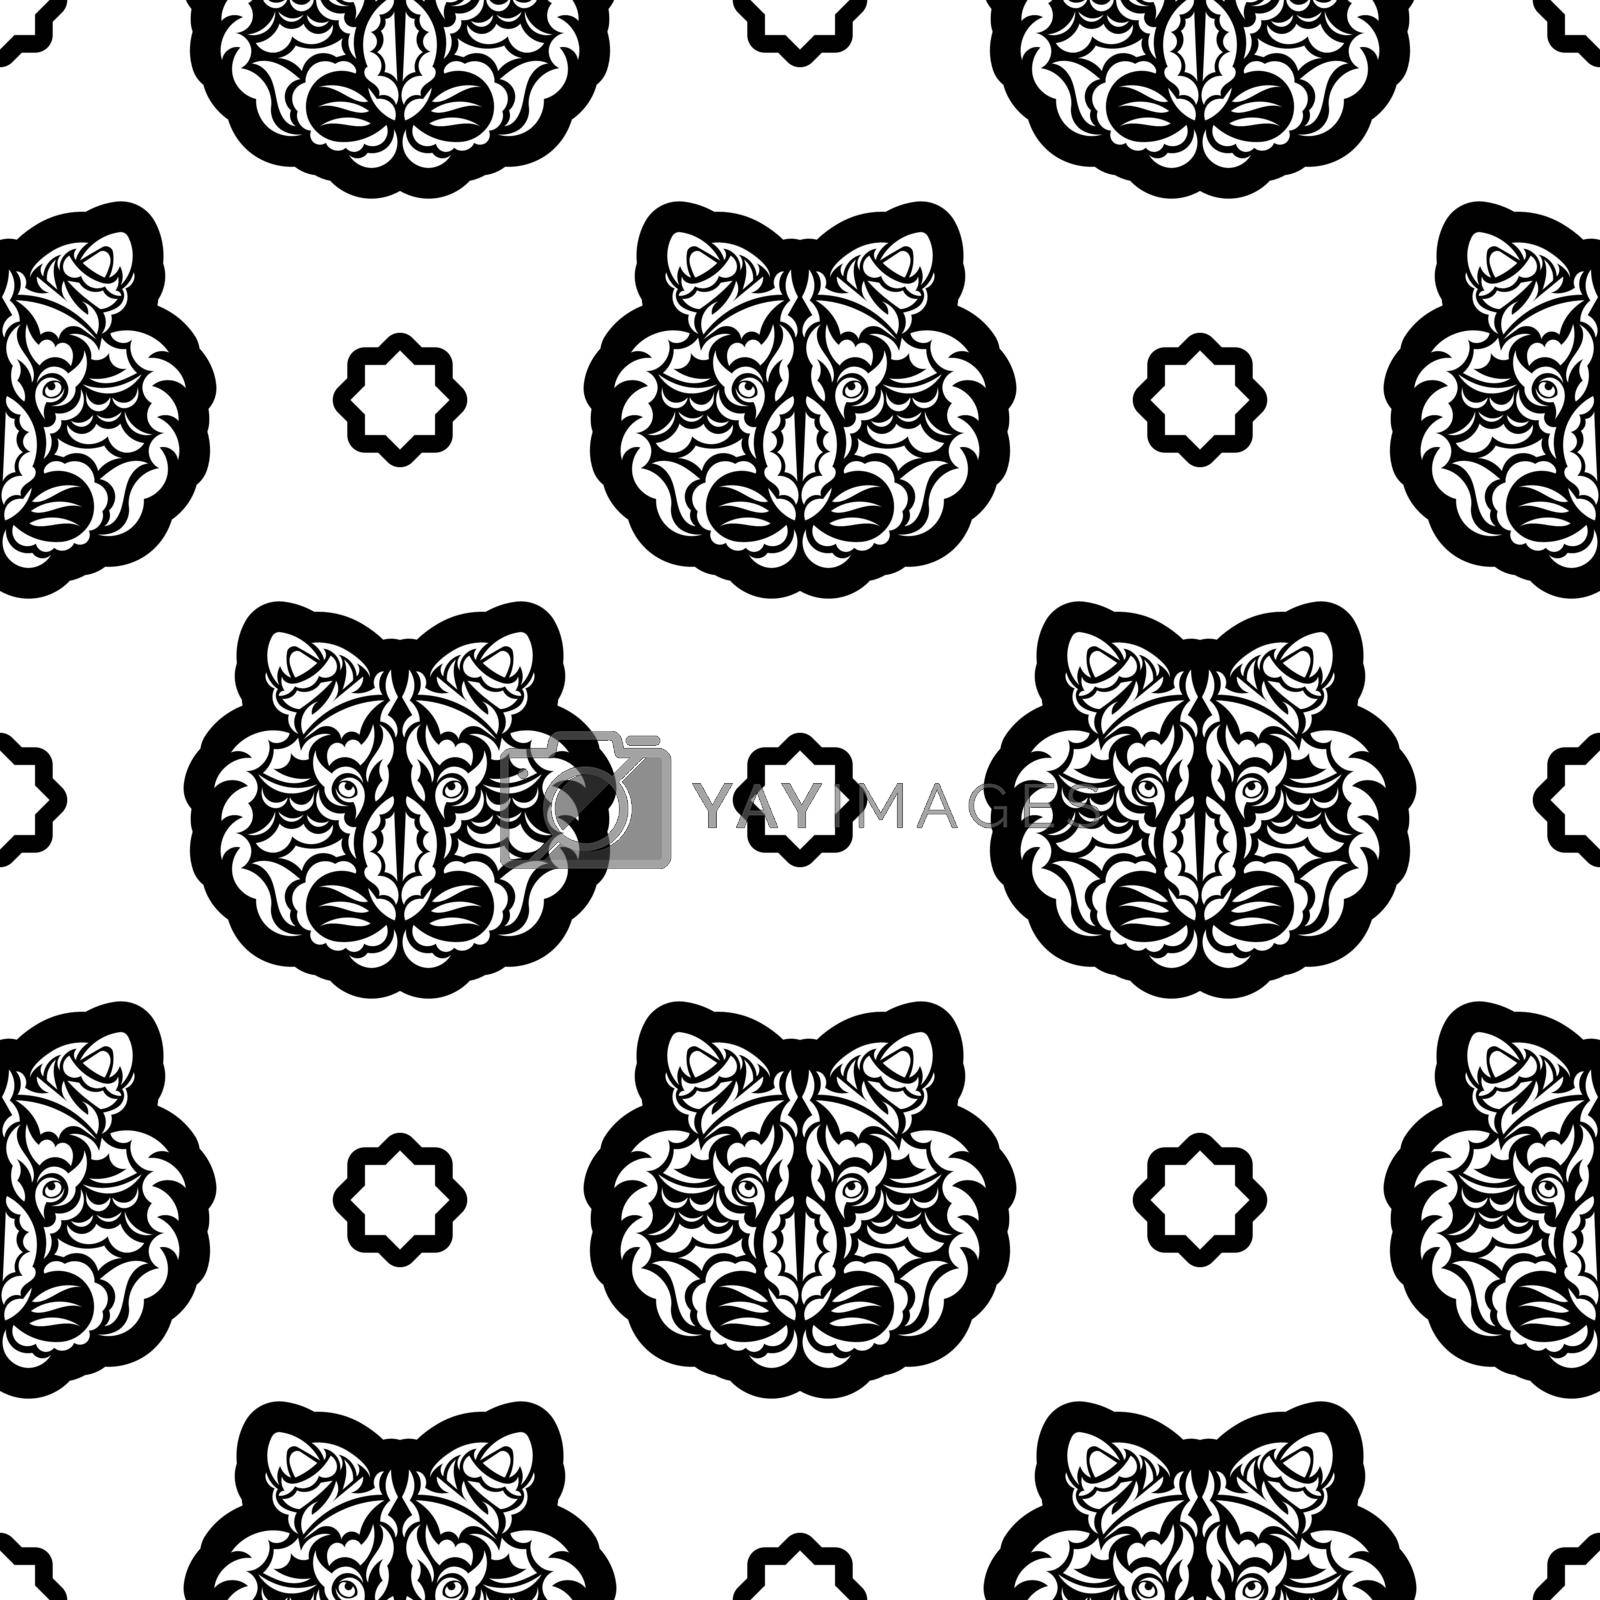 Black and white Seamless pattern with tiger face in Polynesian style. Good for garments, textiles, backgrounds and prints. Vector illustration.